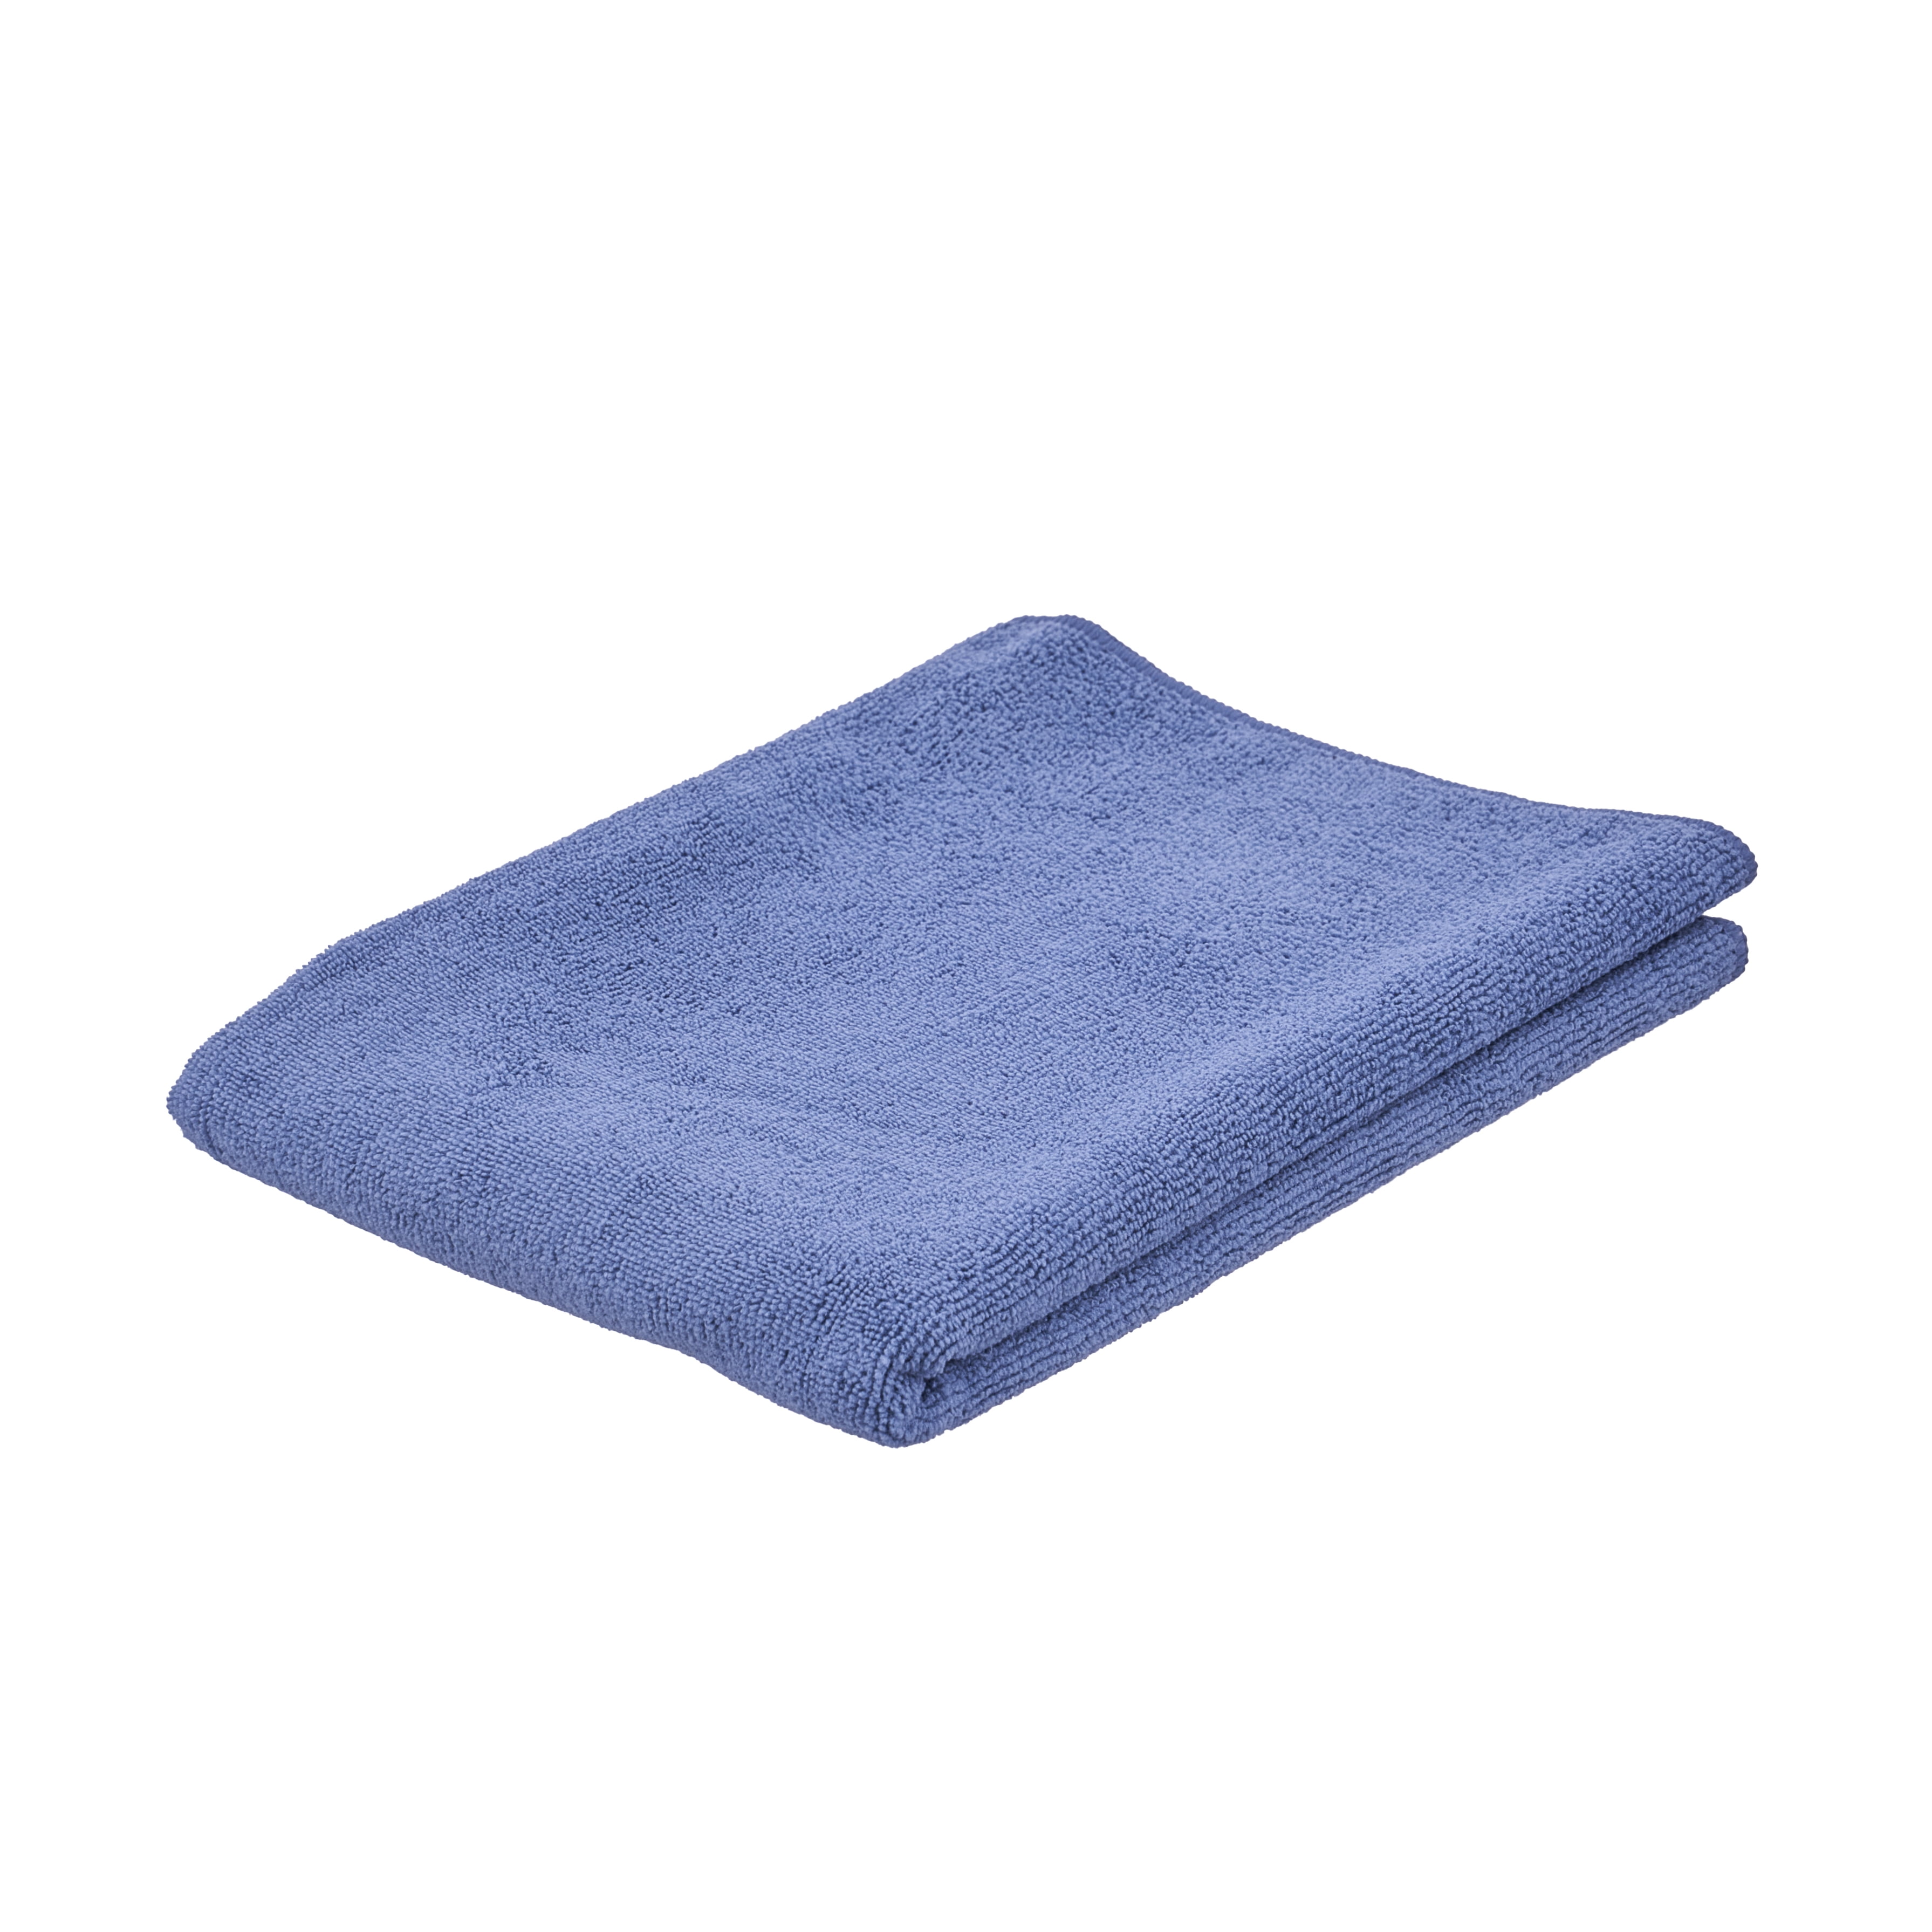 Quickie Microfiber Cleaning Cloth, 14 X 14 in., Blue, 24 Pack, Washable and  Reusable, All-Purpose Towel/Wiper for Multi-Purpose Indoor/Outdoor